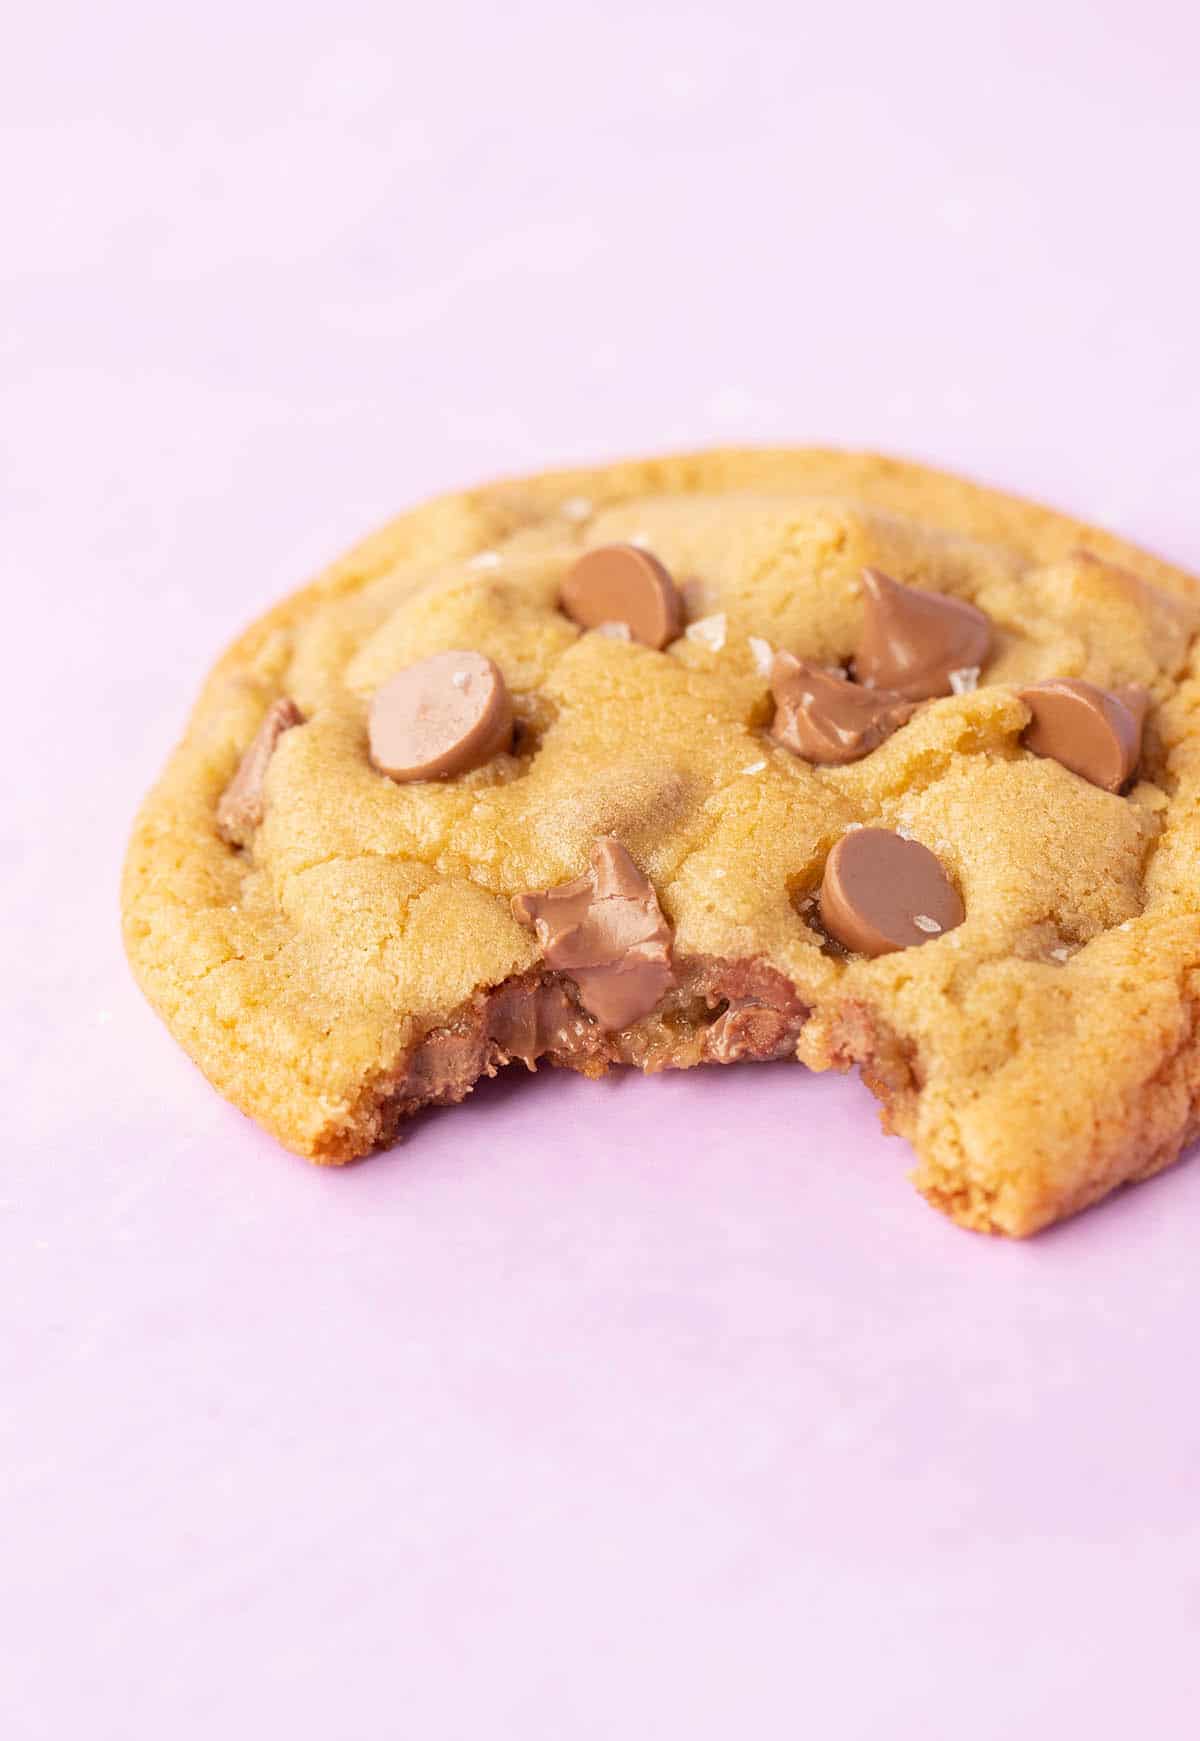 A single chocolate chip cookie with a bite taken out of it on a purple backdrop.